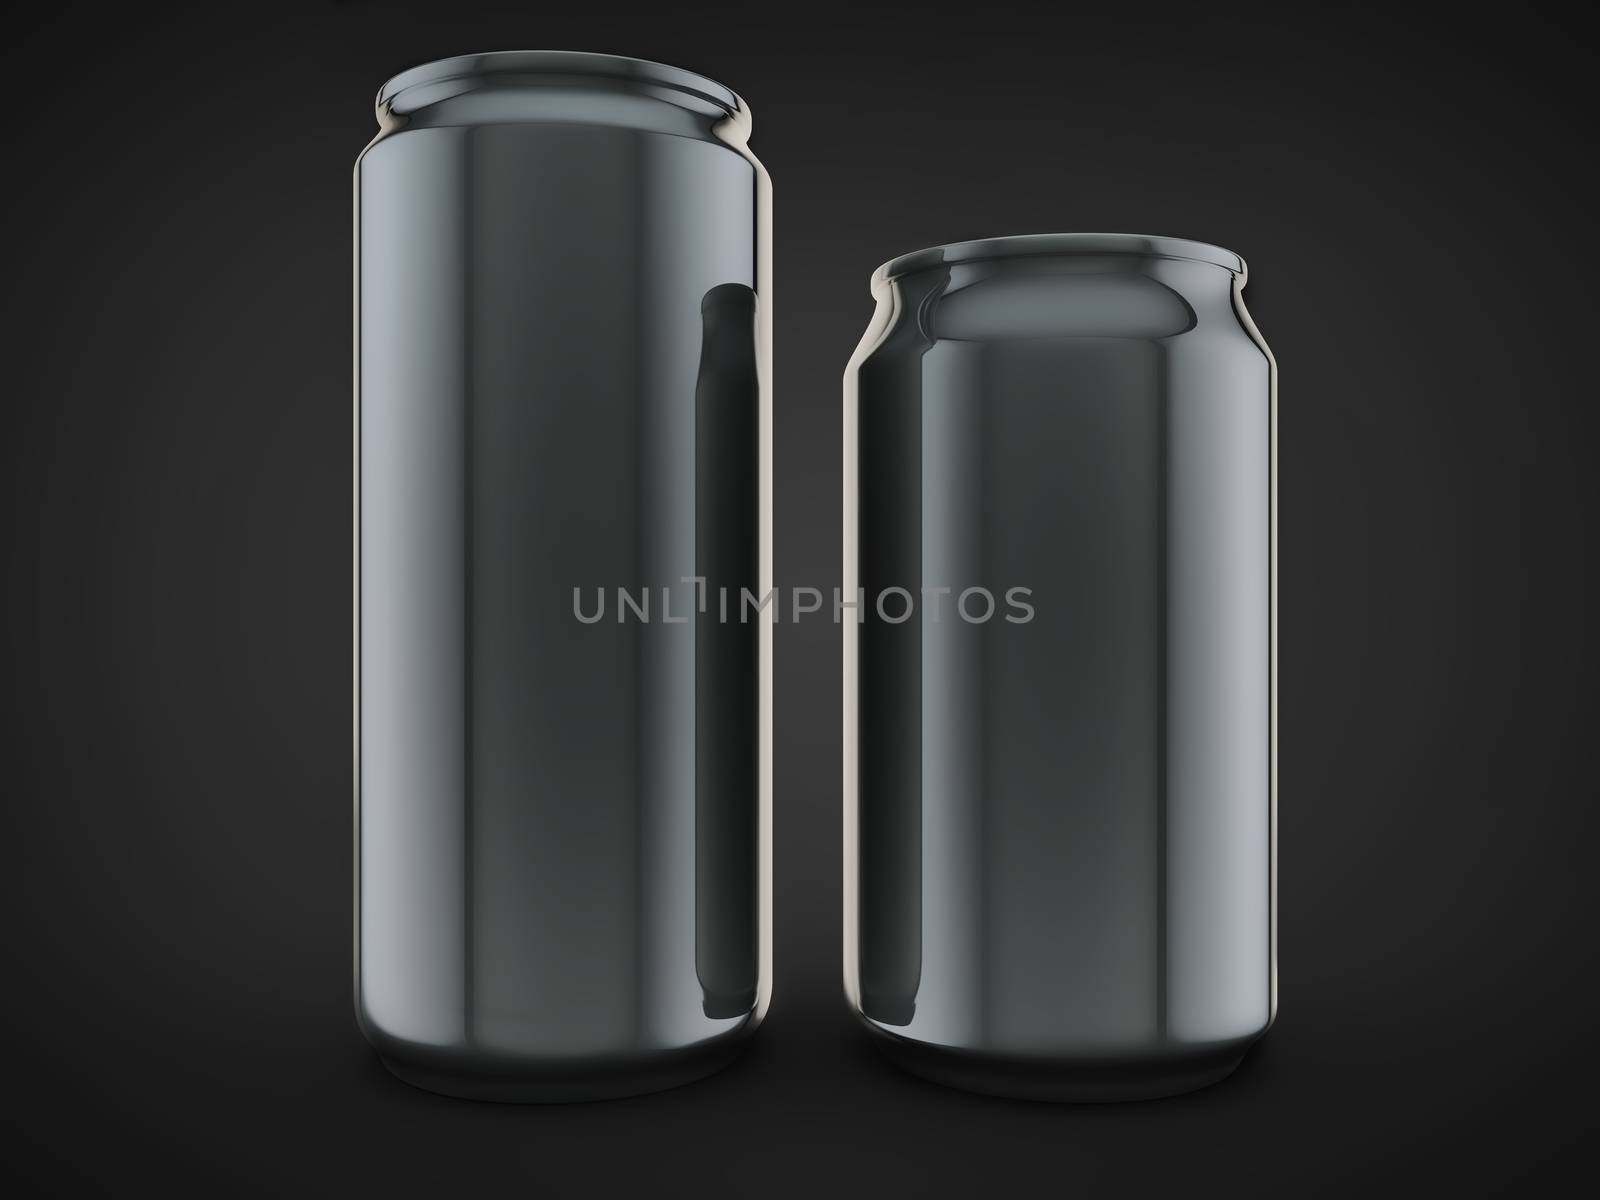 pair alluminium soda can front view empty design isolated black background.